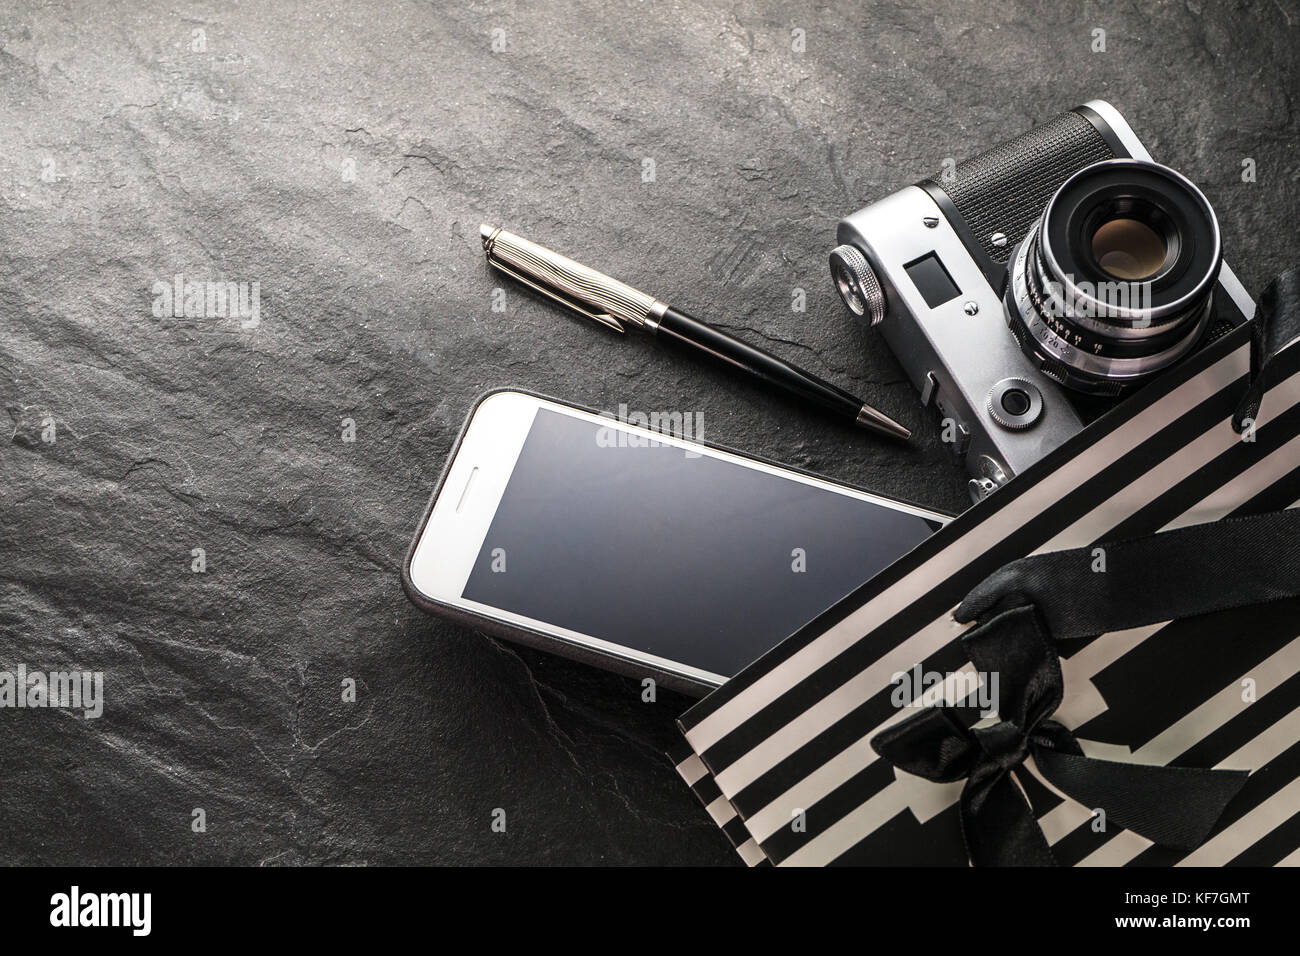 Phone, camera, pen in a black bag with white strips free space horizontal Stock Photo